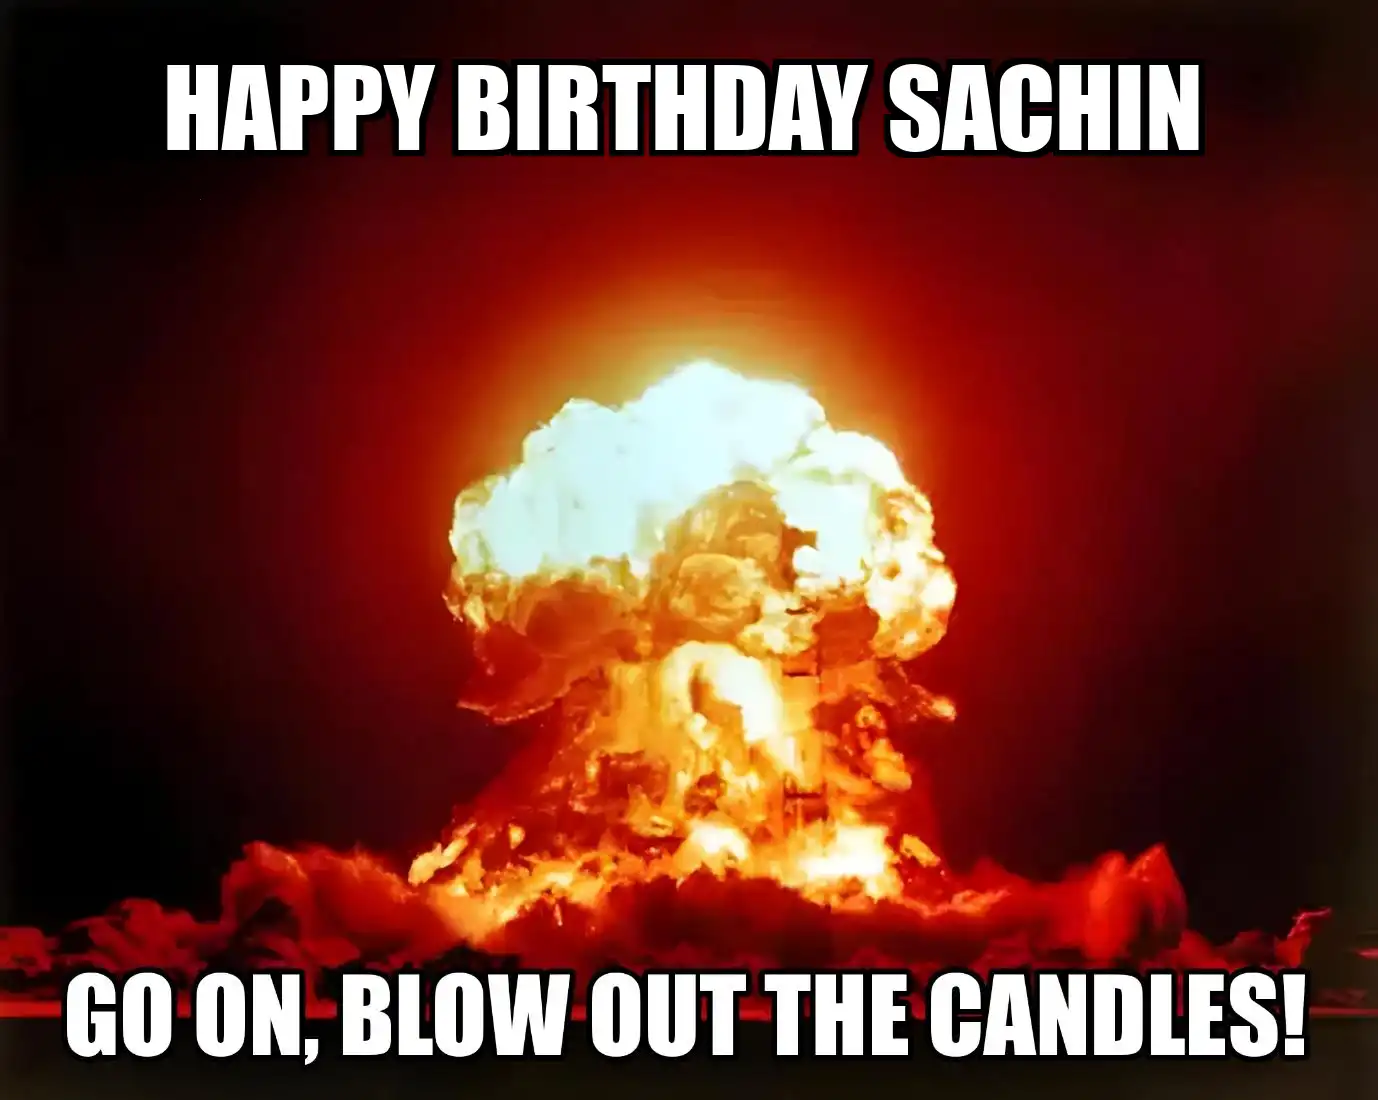 Happy Birthday Sachin Go On Blow Out The Candles Meme